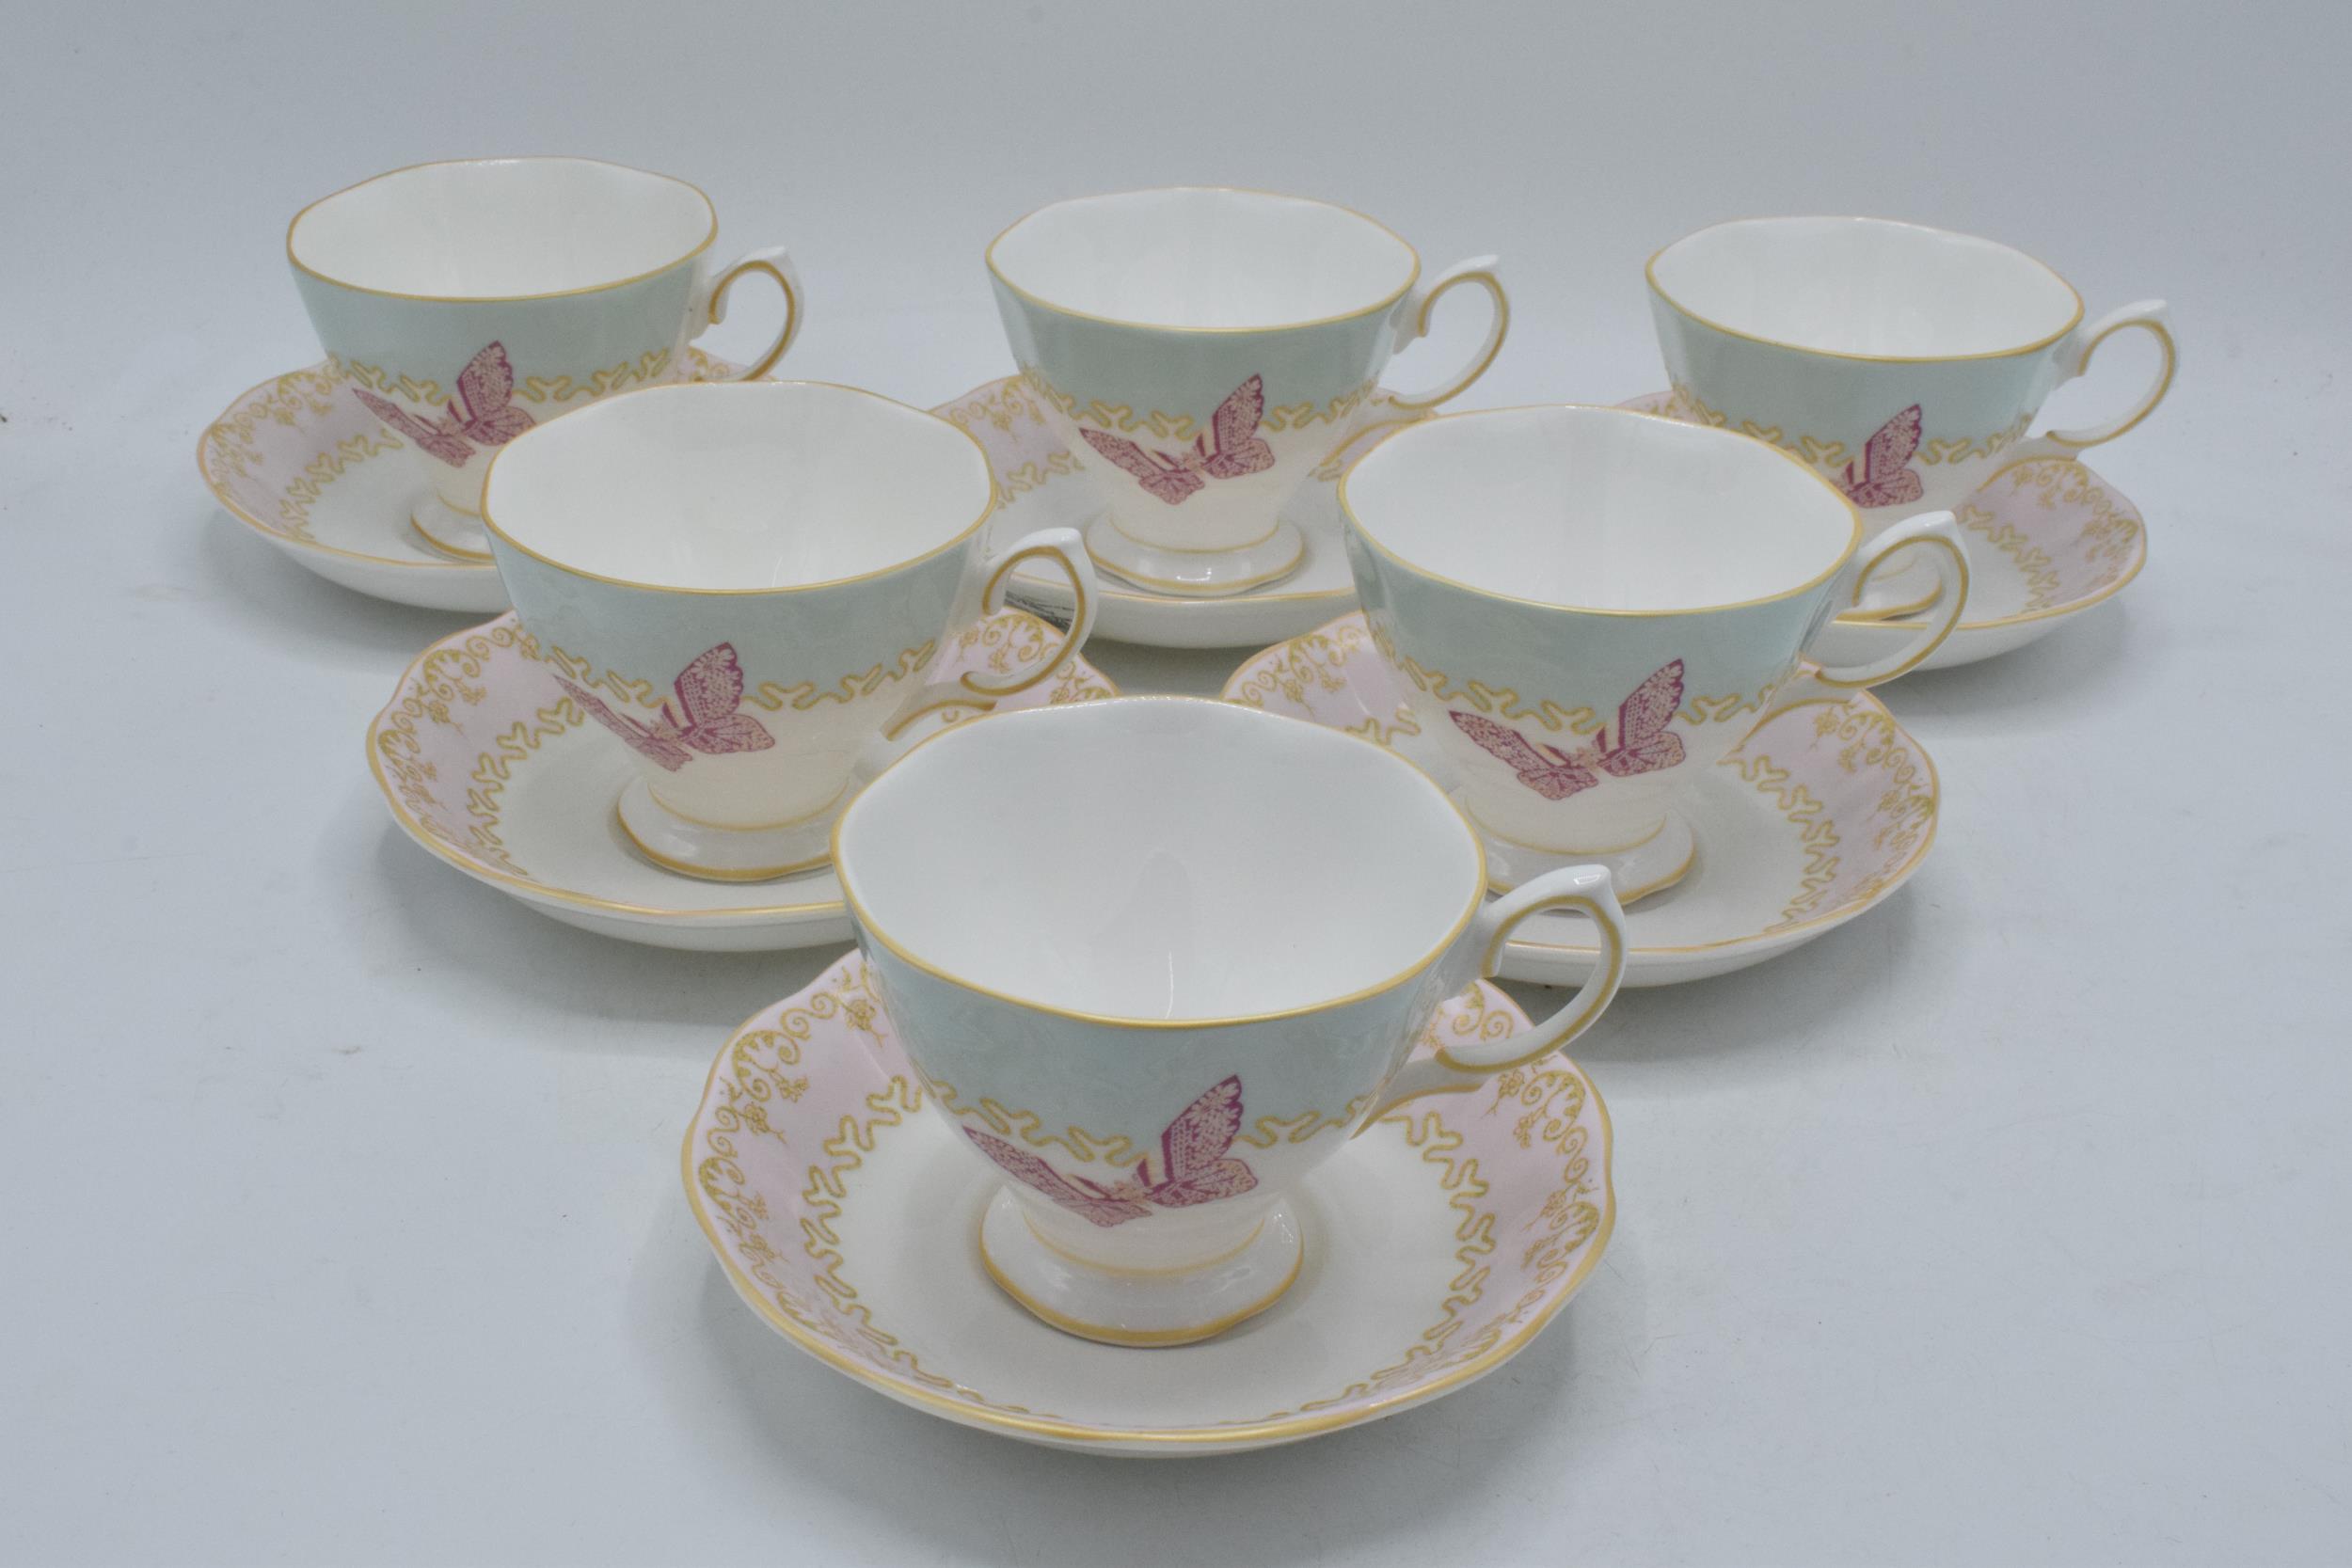 Royal Albert Zandra Rhodes My Favourite Things tea ware to include 6 cups and 6 saucers (12). In